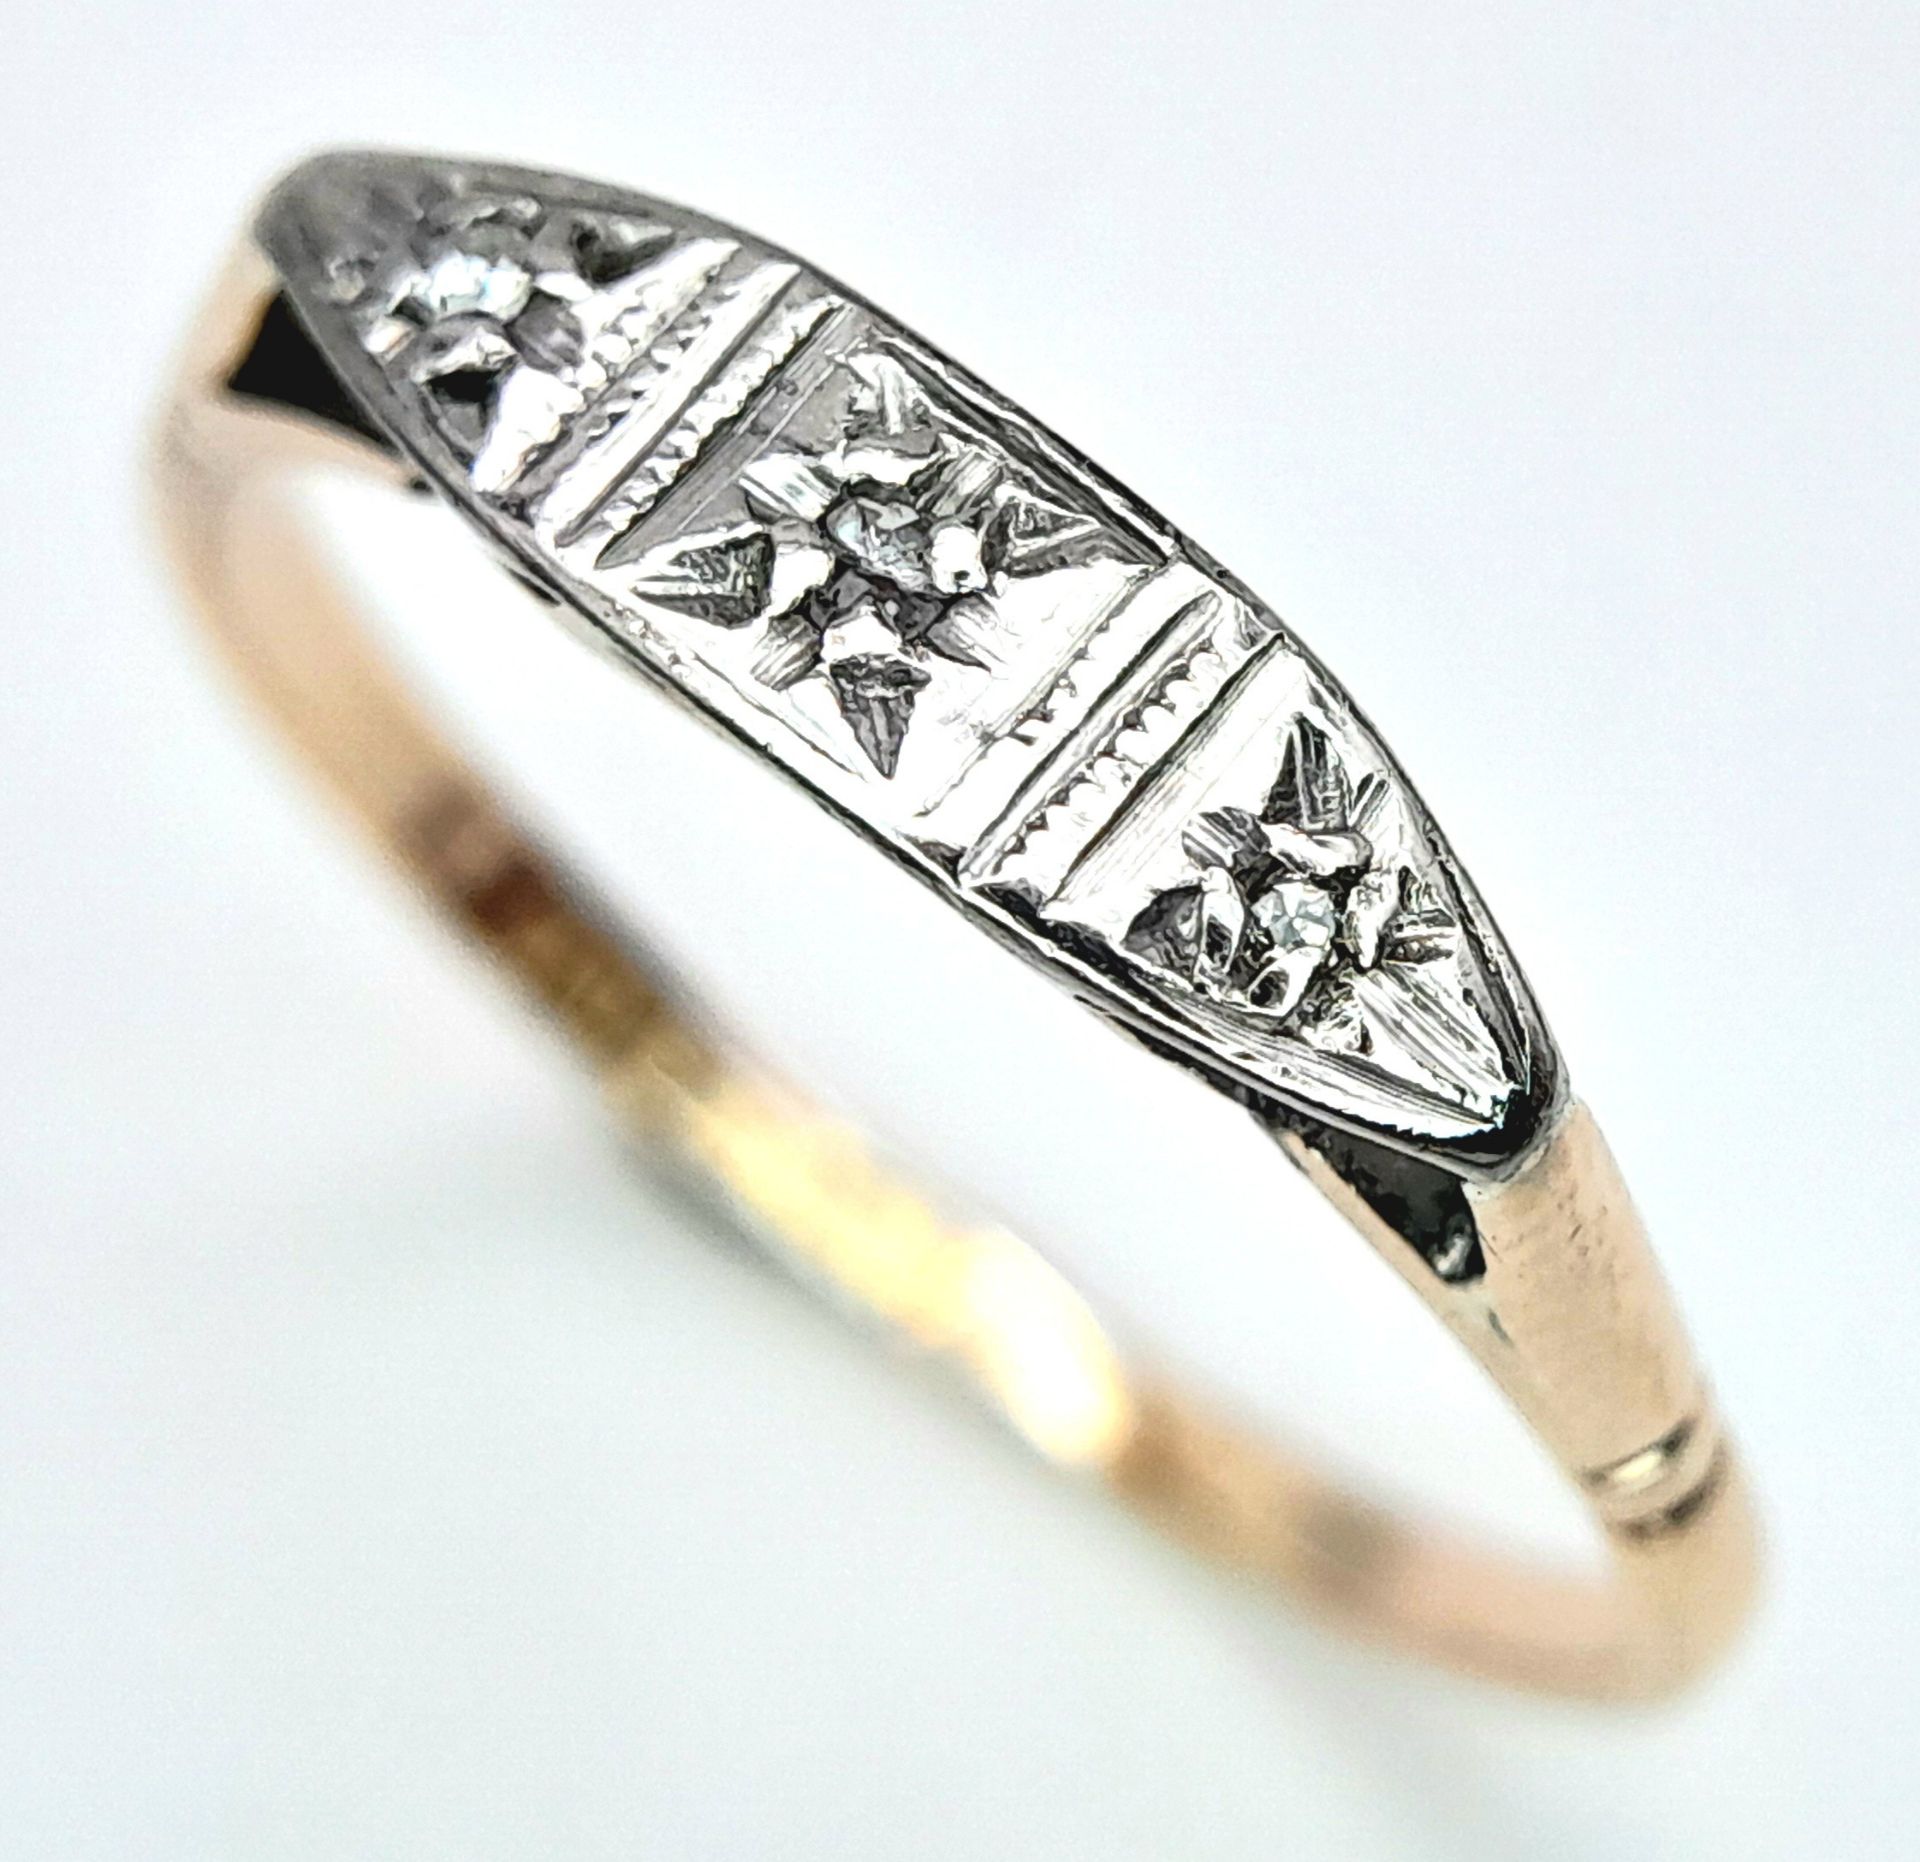 AN 18K YELLOW GOLD & PLATINUM 3 STONE VINTAGE DIAMOND RING. Size N, 1.3g total weight. Ref: SC 8062